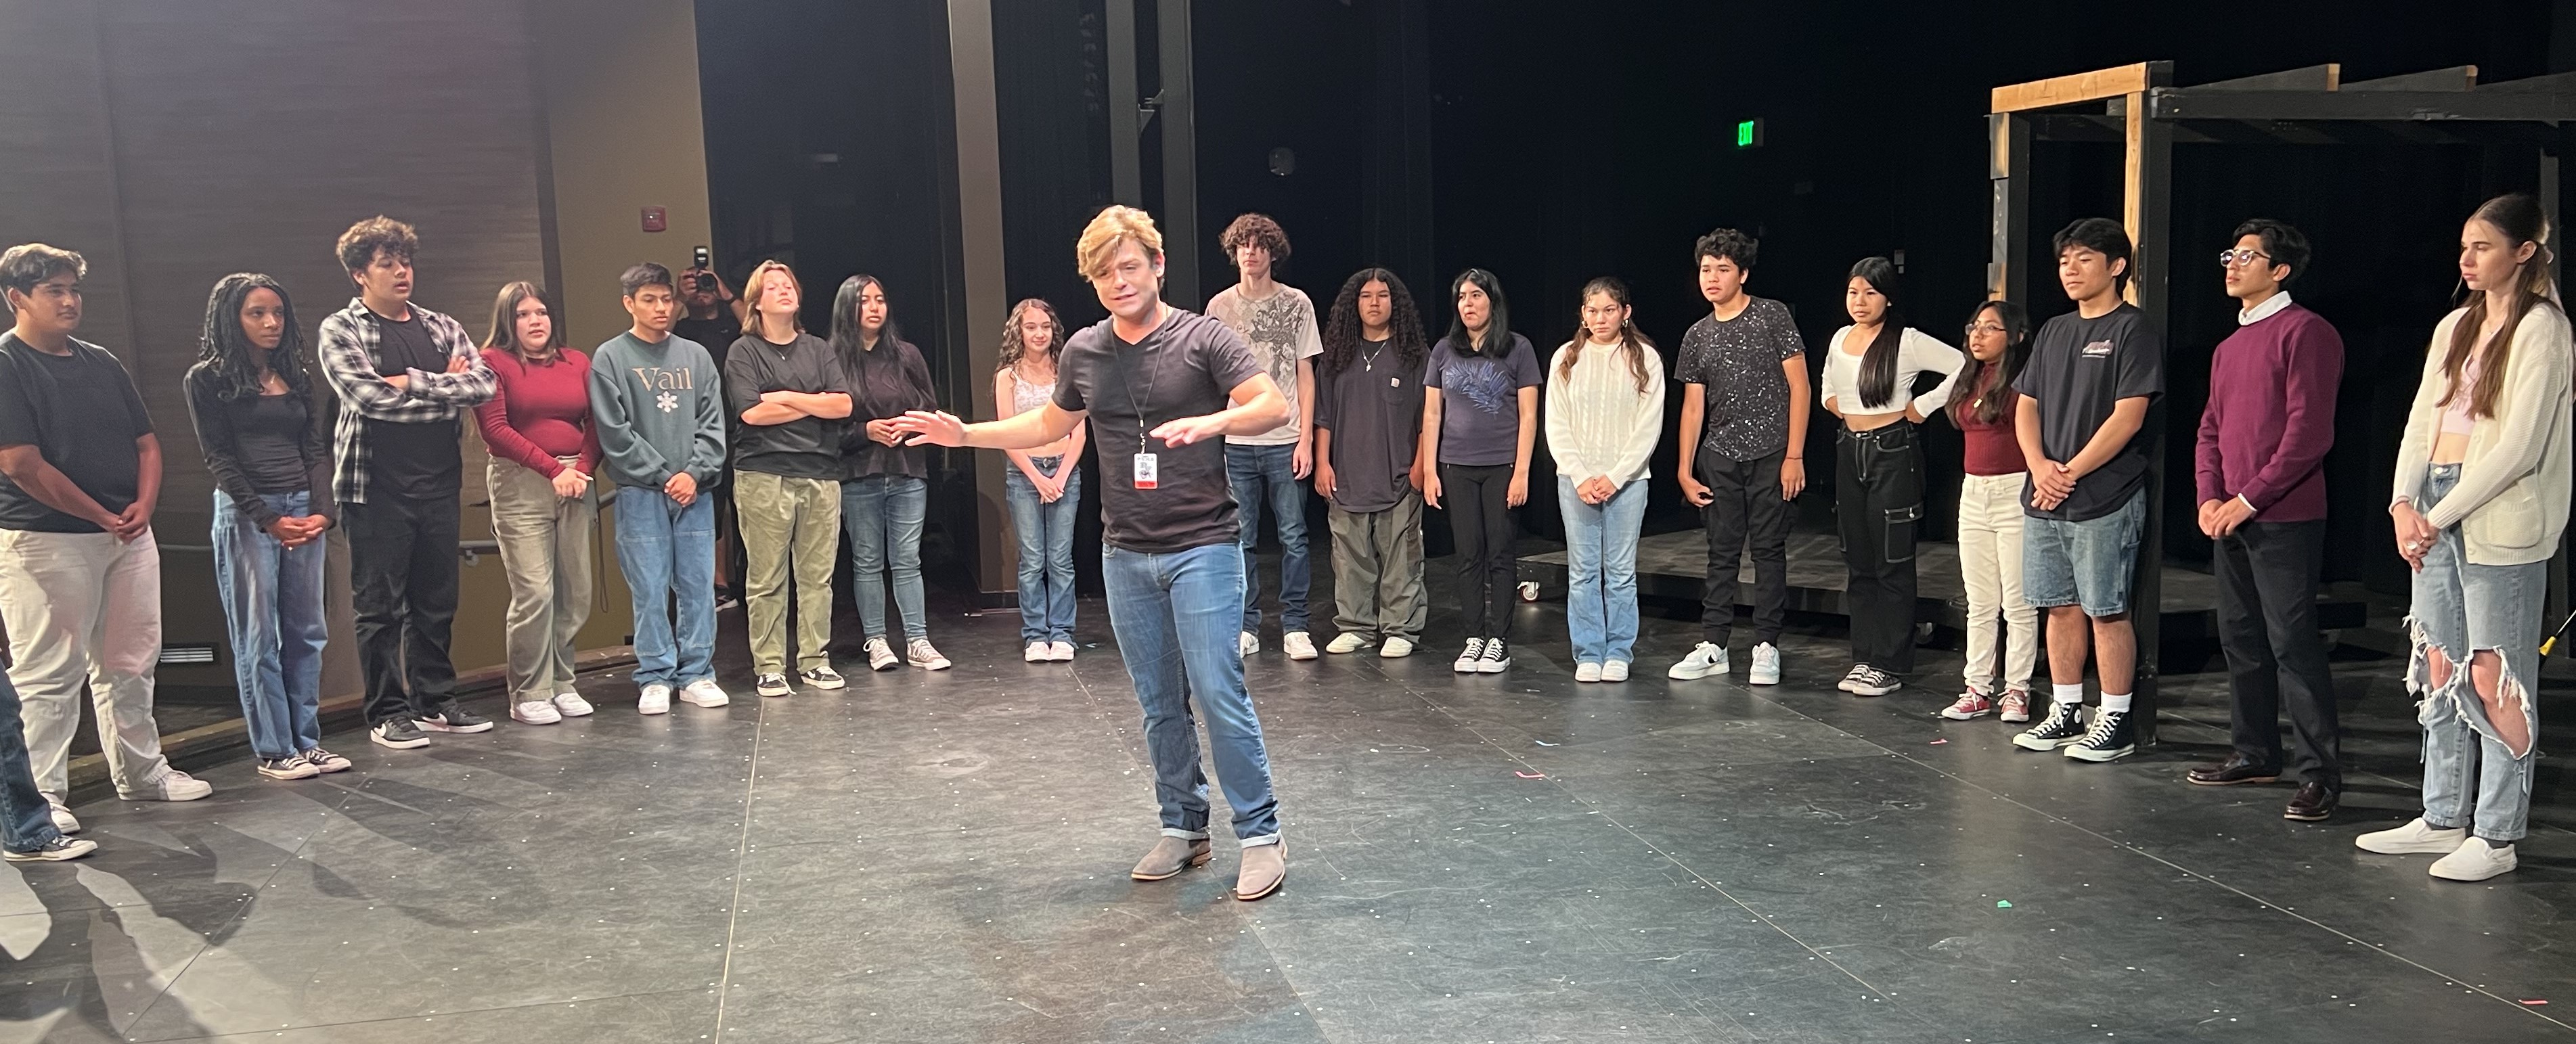 PVHS Acting Workshop